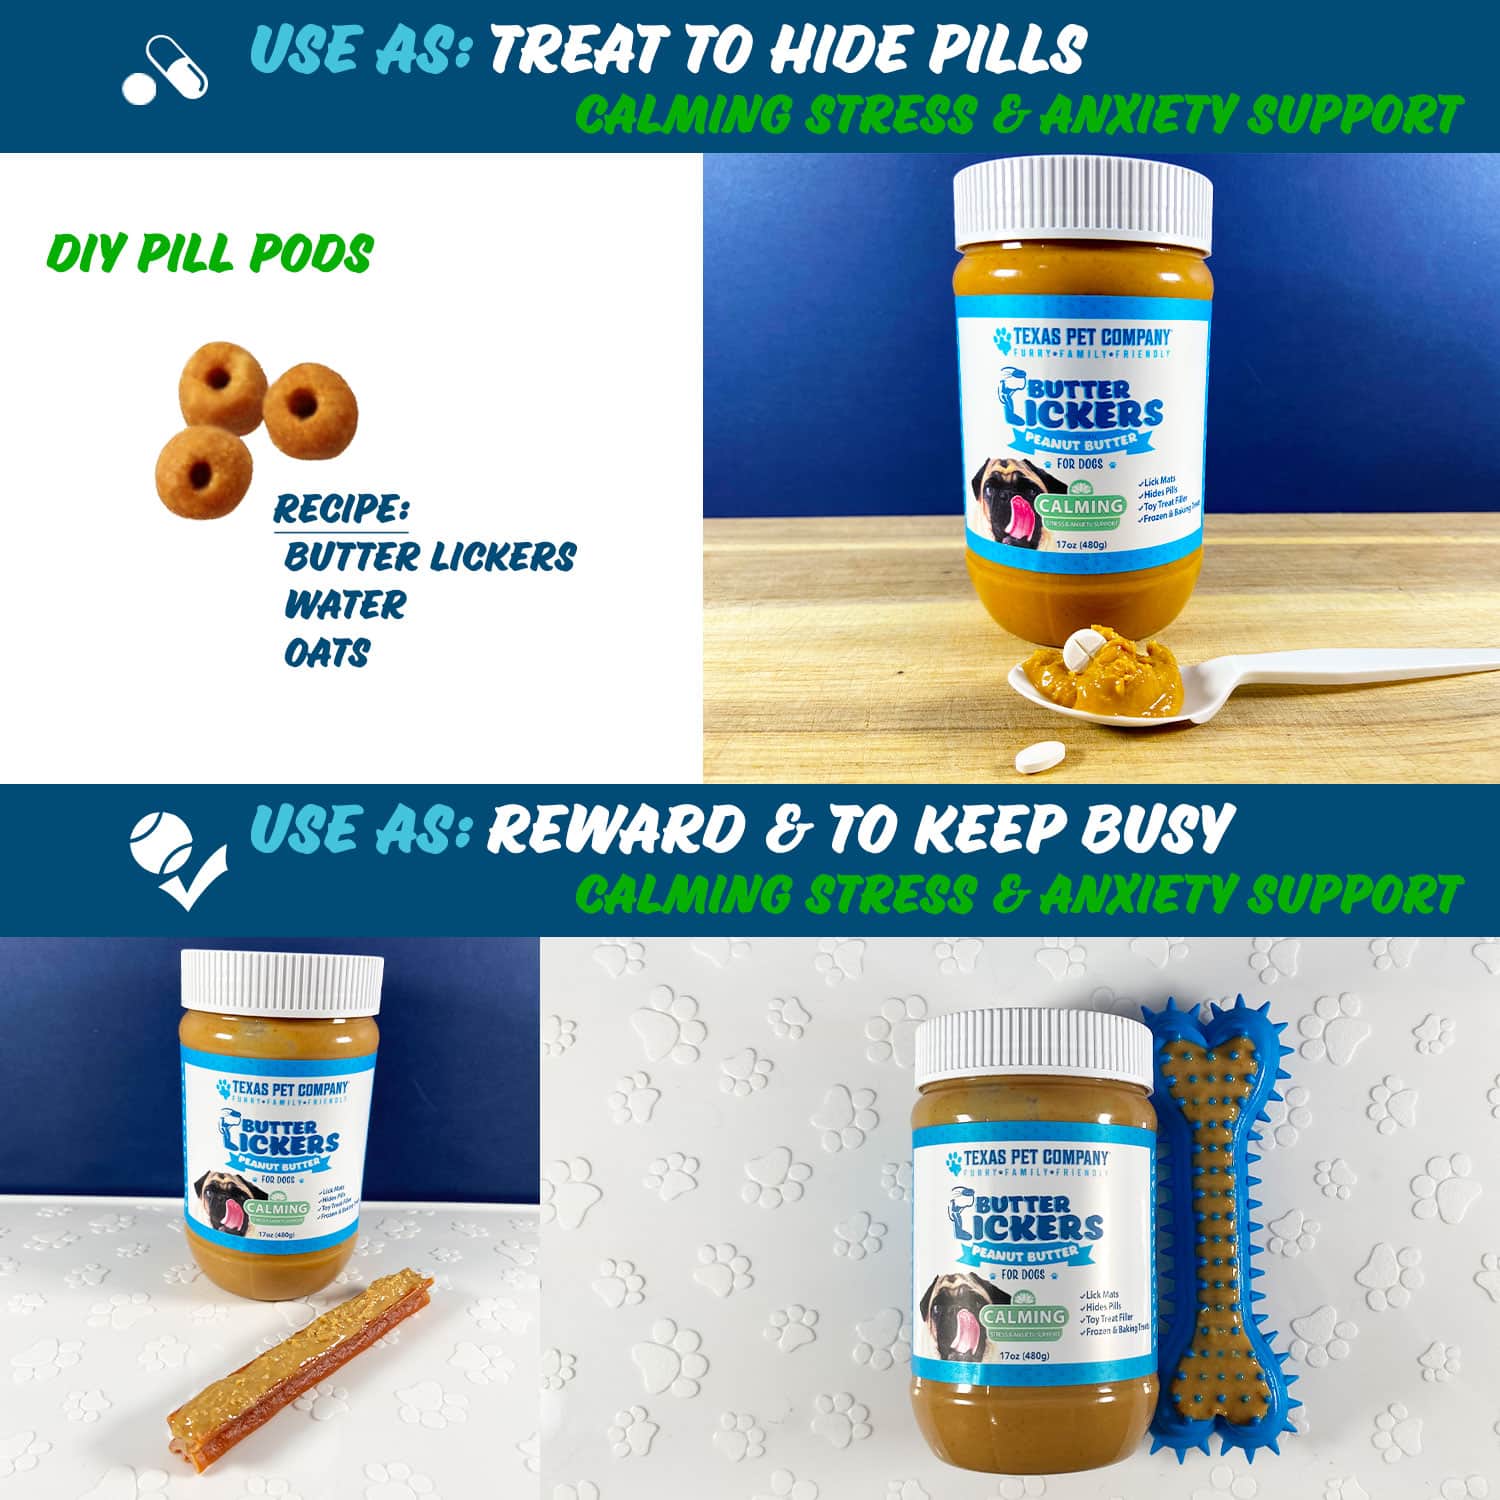 https://texaspetcompany.com/wp-content/uploads/2022/04/Butter-Lickers-Calming-Peanut-Butter-For-Dogs-Use-Pills-and-Reward.jpg